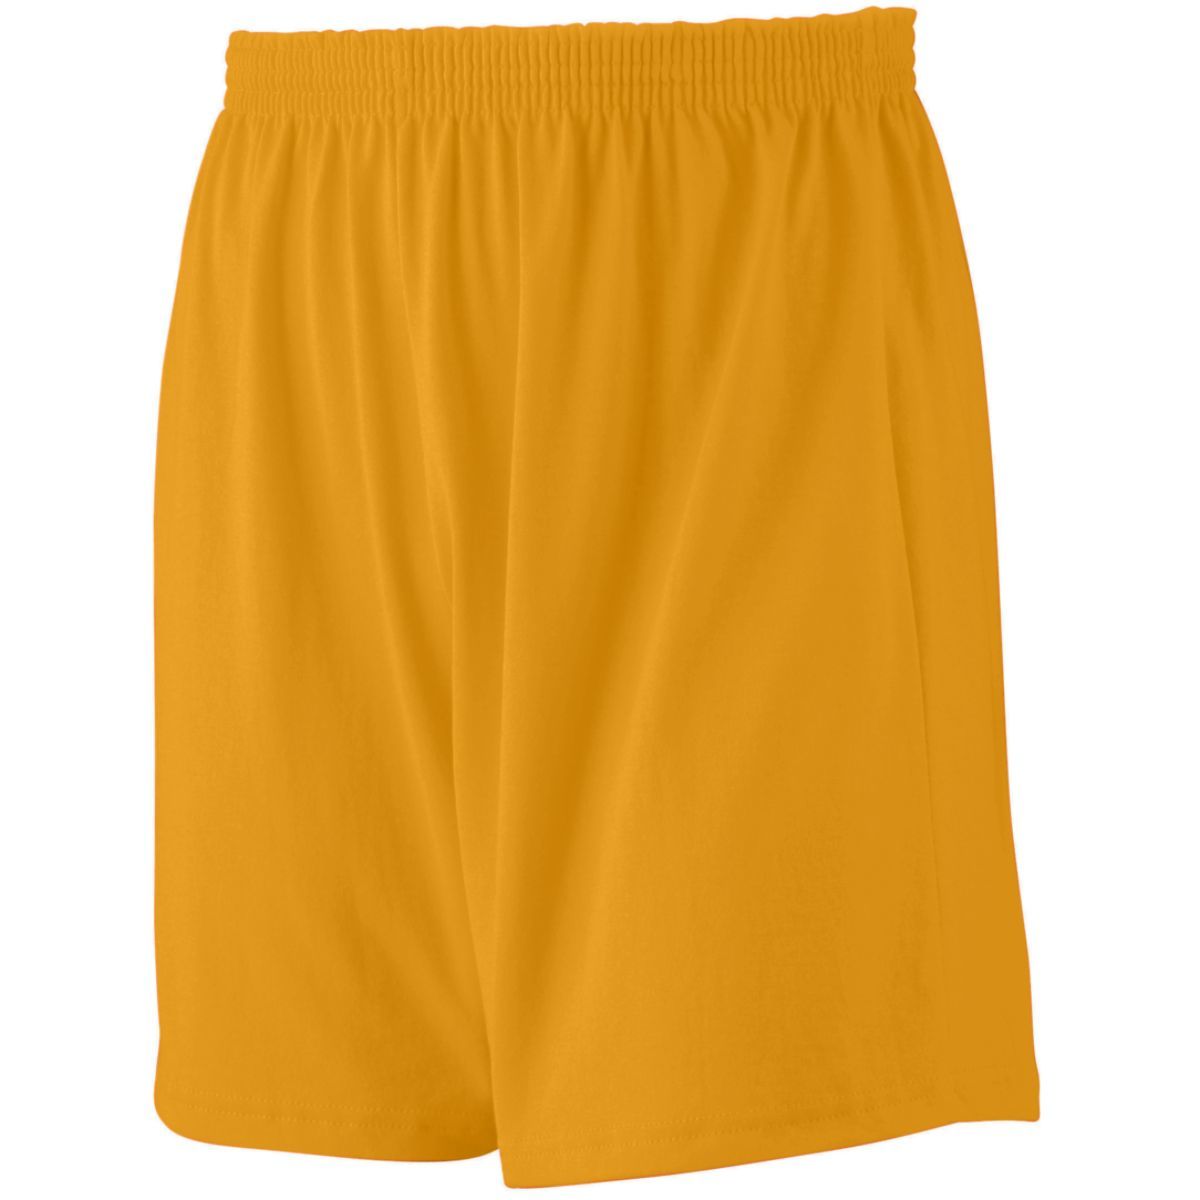 Augusta Sportswear Jersey Knit Shorts in Gold  -Part of the Adult, Adult-Shorts, Augusta-Products product lines at KanaleyCreations.com